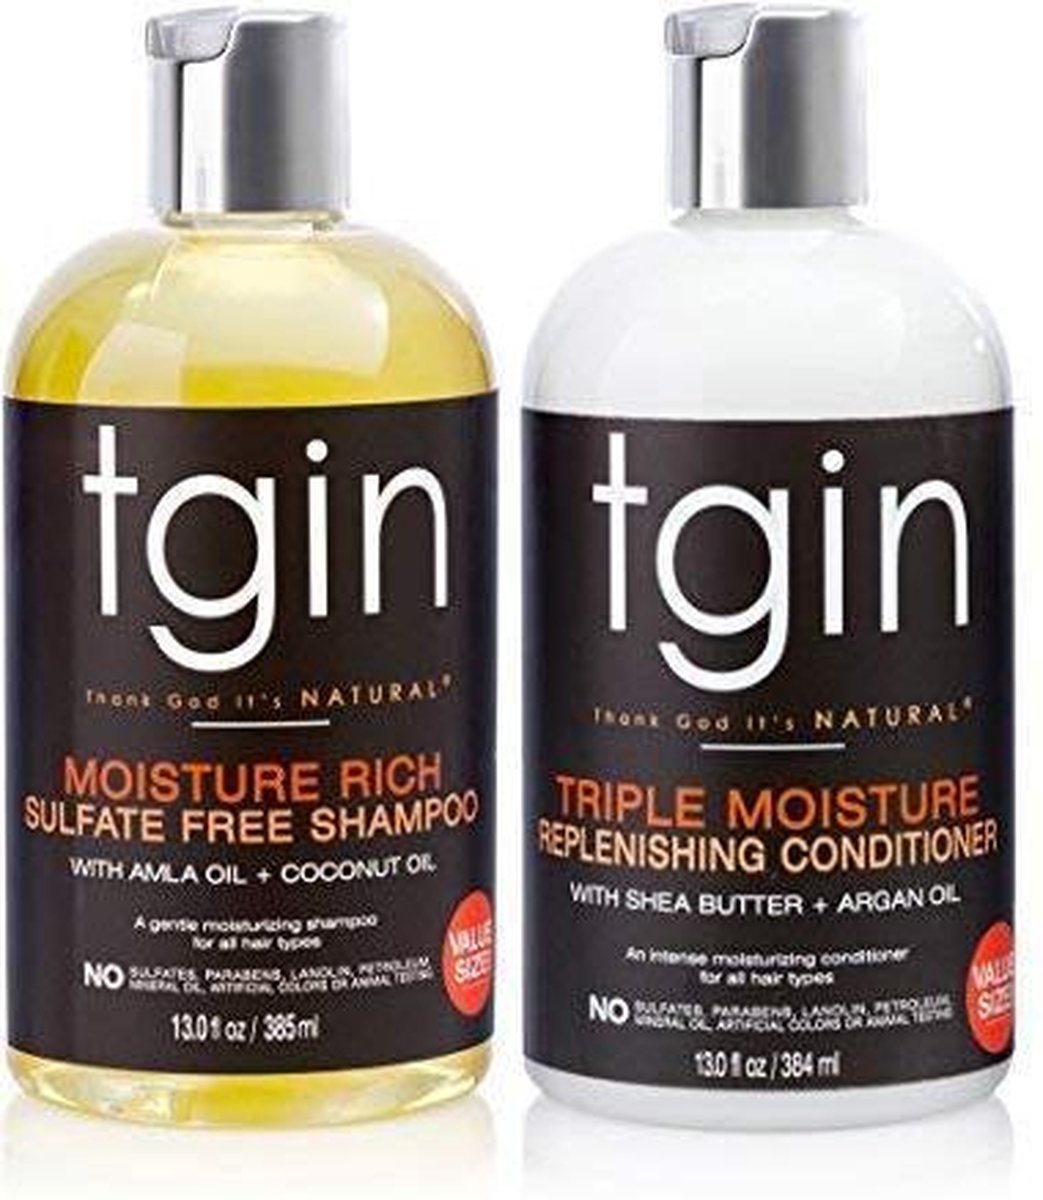 TGIN Shampoo + Conditioner Duo For Natural Hair - Dry Hair - Curly Hair